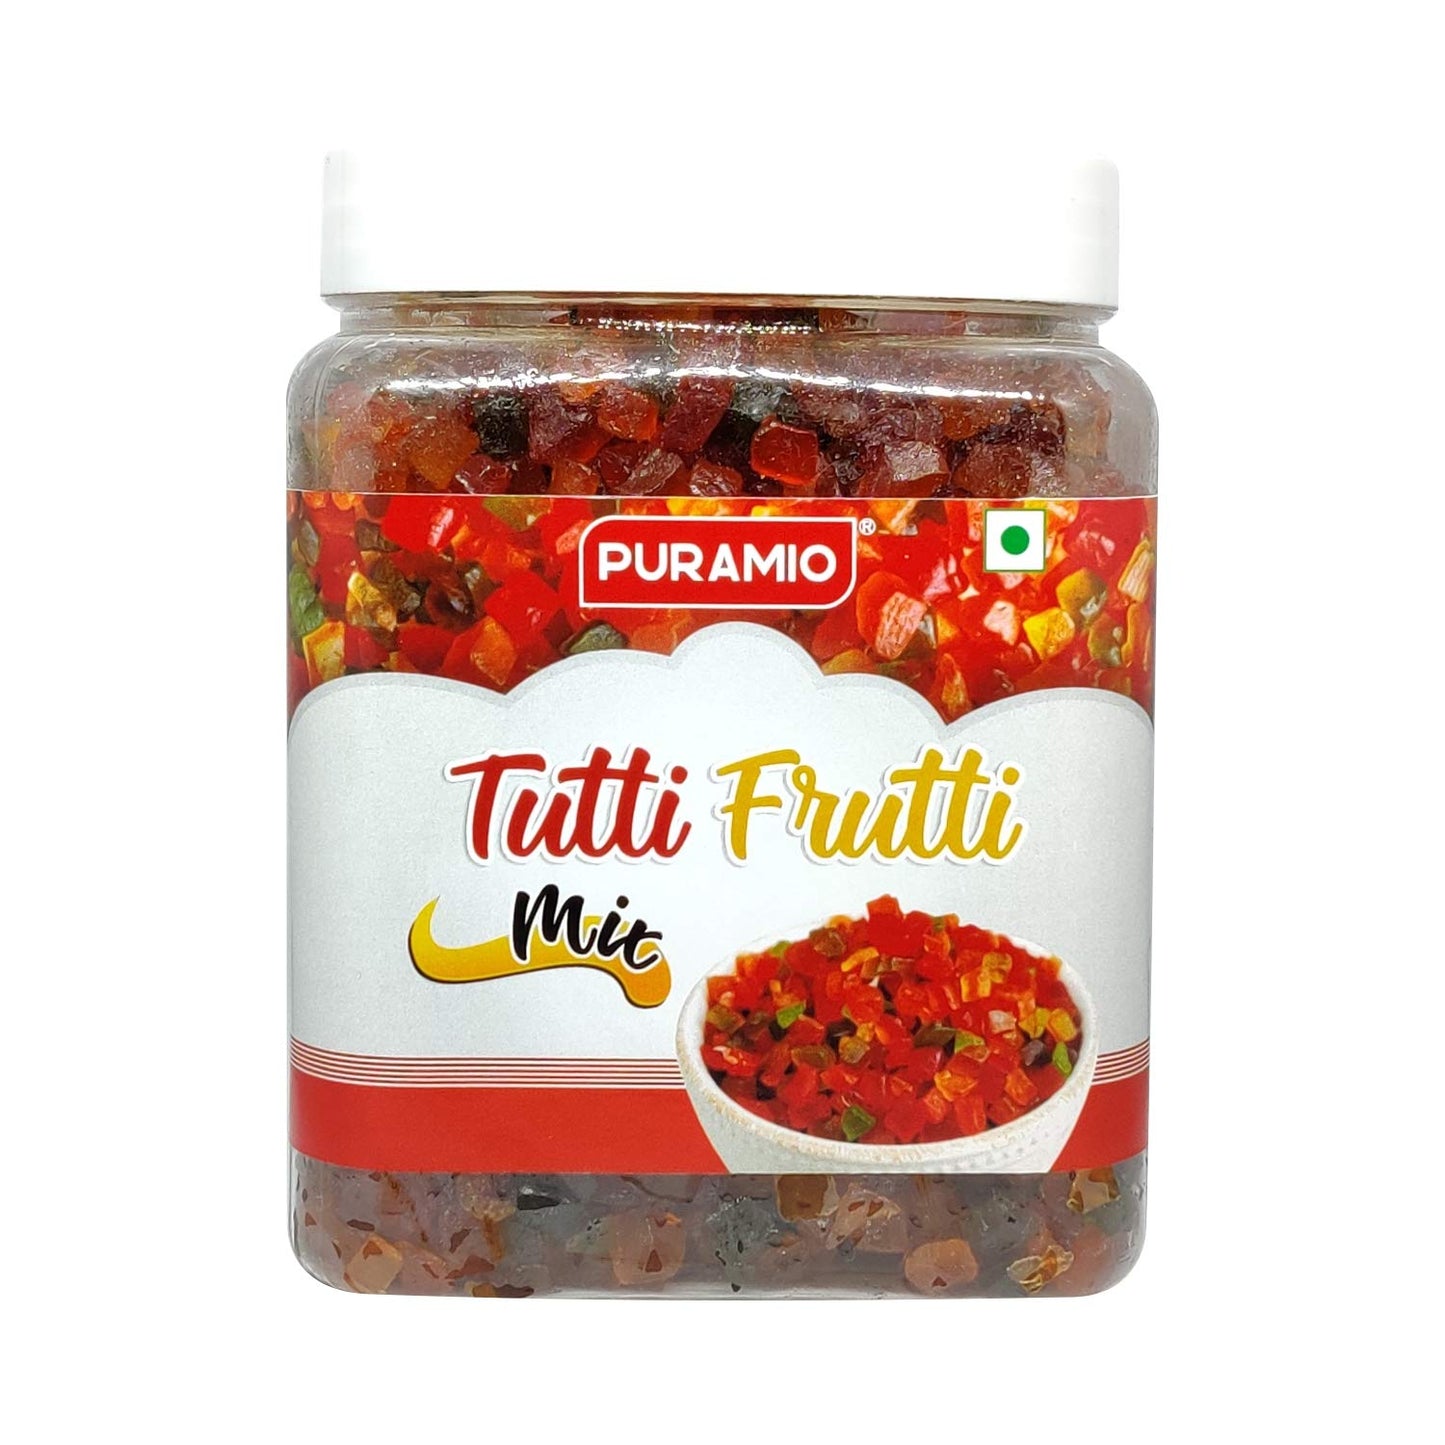 Puramio Combo of Tutti Frutti - Mix & Red, 800g Each (Pack of 2)